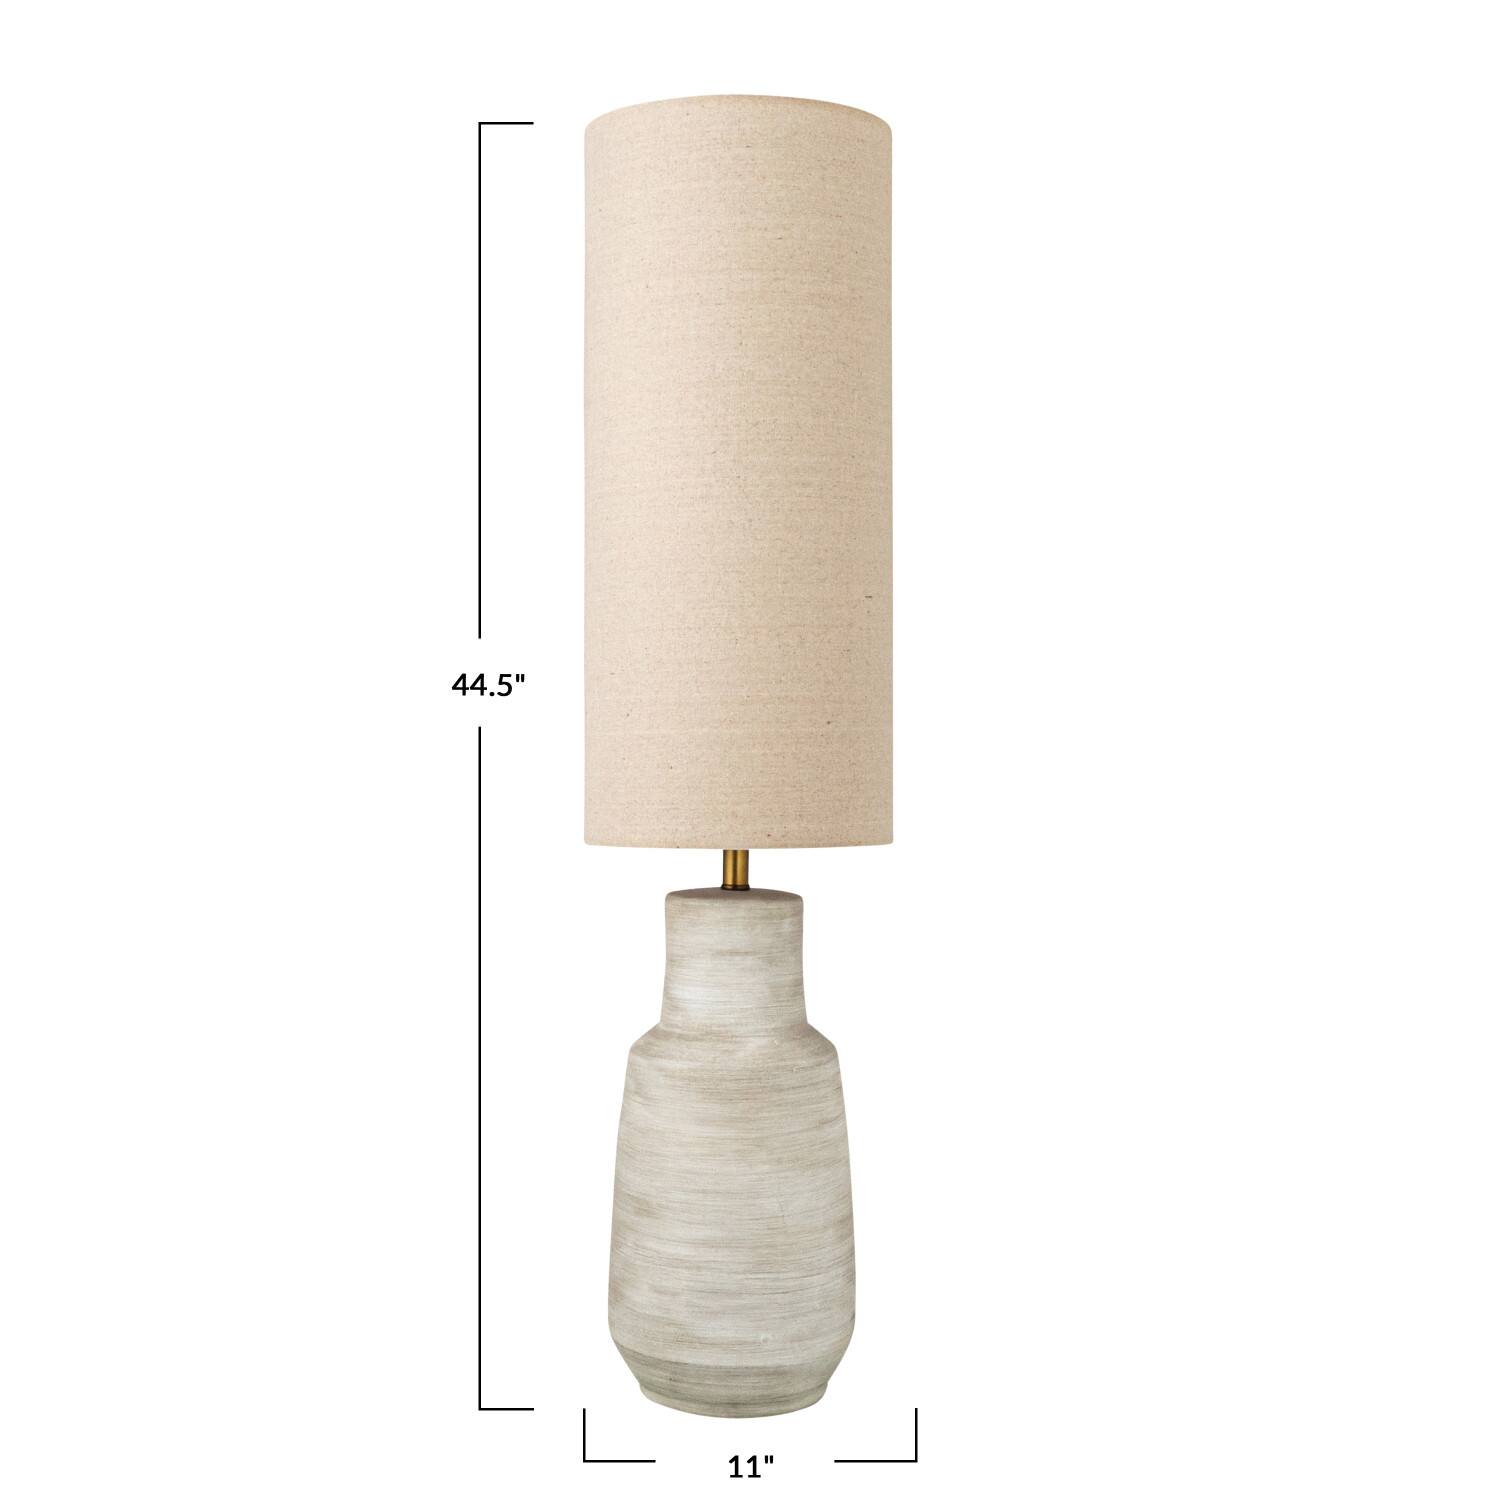 4ft. Sand Color Ceramic Floor Lamp with Linen Shade